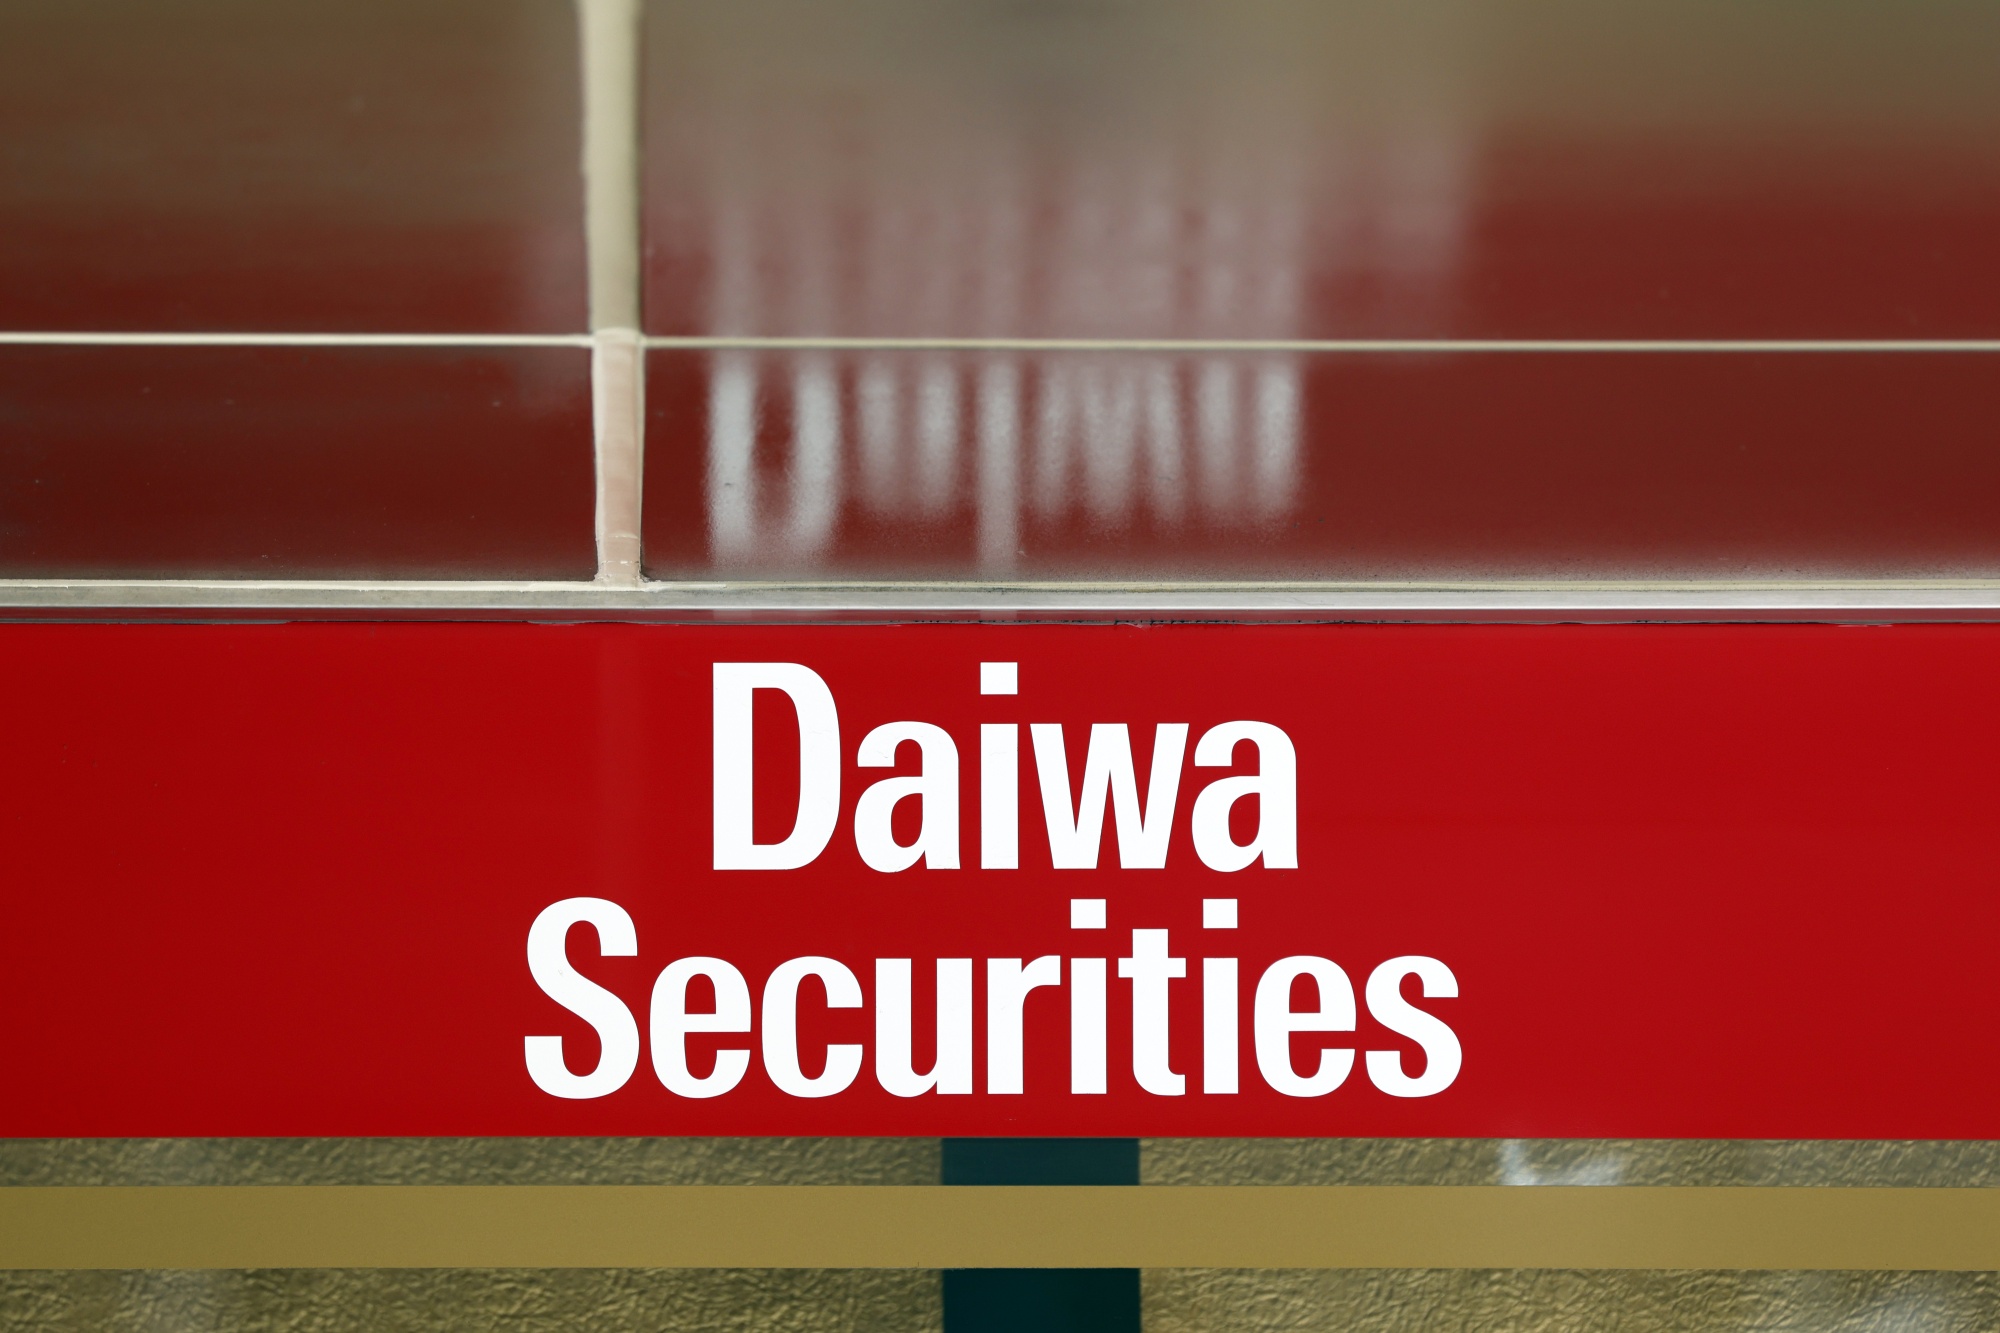 Daiwa Readies Fixed-Income Trading Arm for Bond Market Revival - Bloomberg